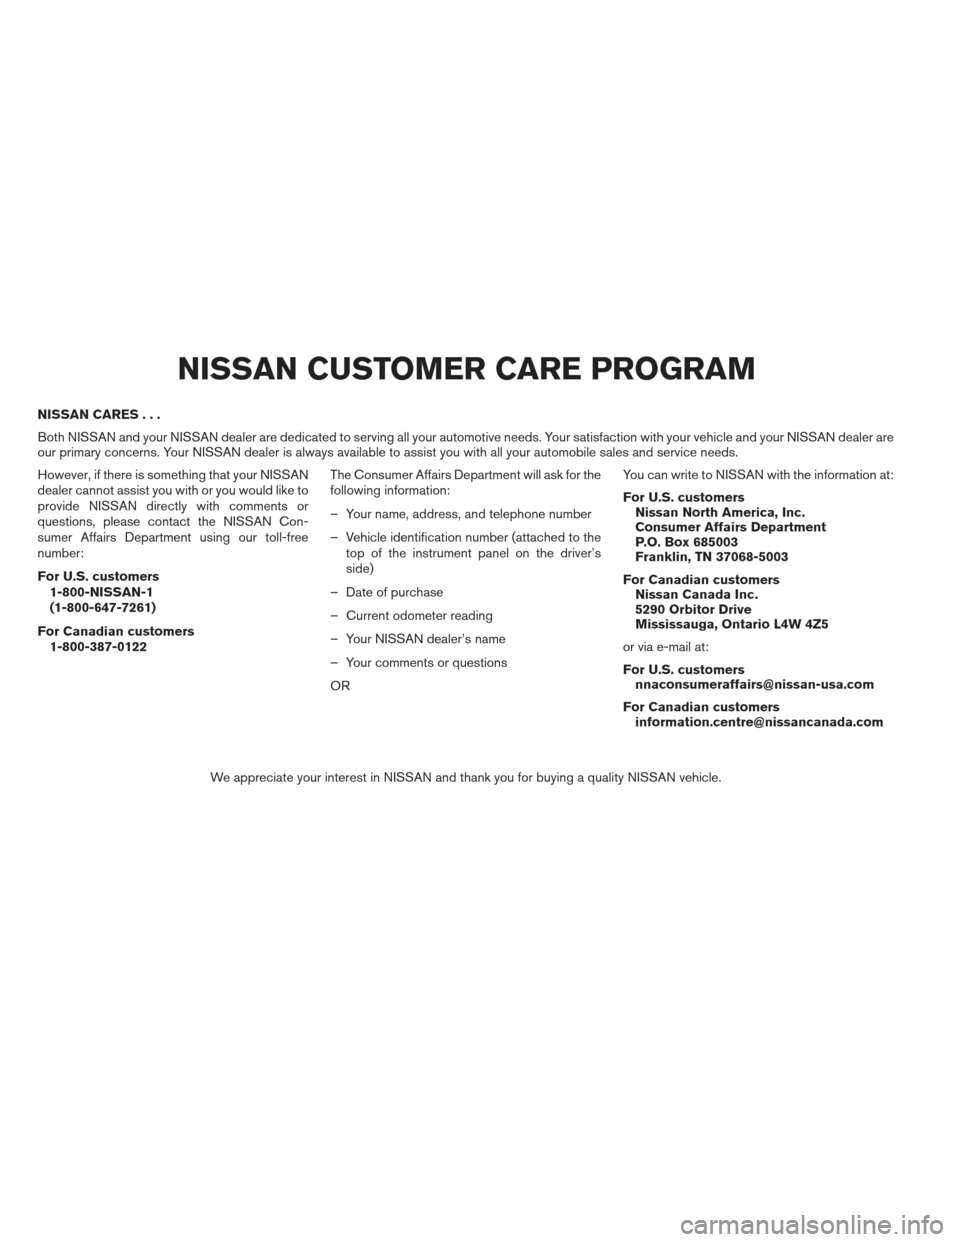 NISSAN XTERRA 2012 N50 / 2.G Owners Manual NISSAN CARES...
Both NISSAN and your NISSAN dealer are dedicated to serving all your automotive needs. Your satisfaction with your vehicle and your NISSAN dealer are
our primary concerns. Your NISSAN 